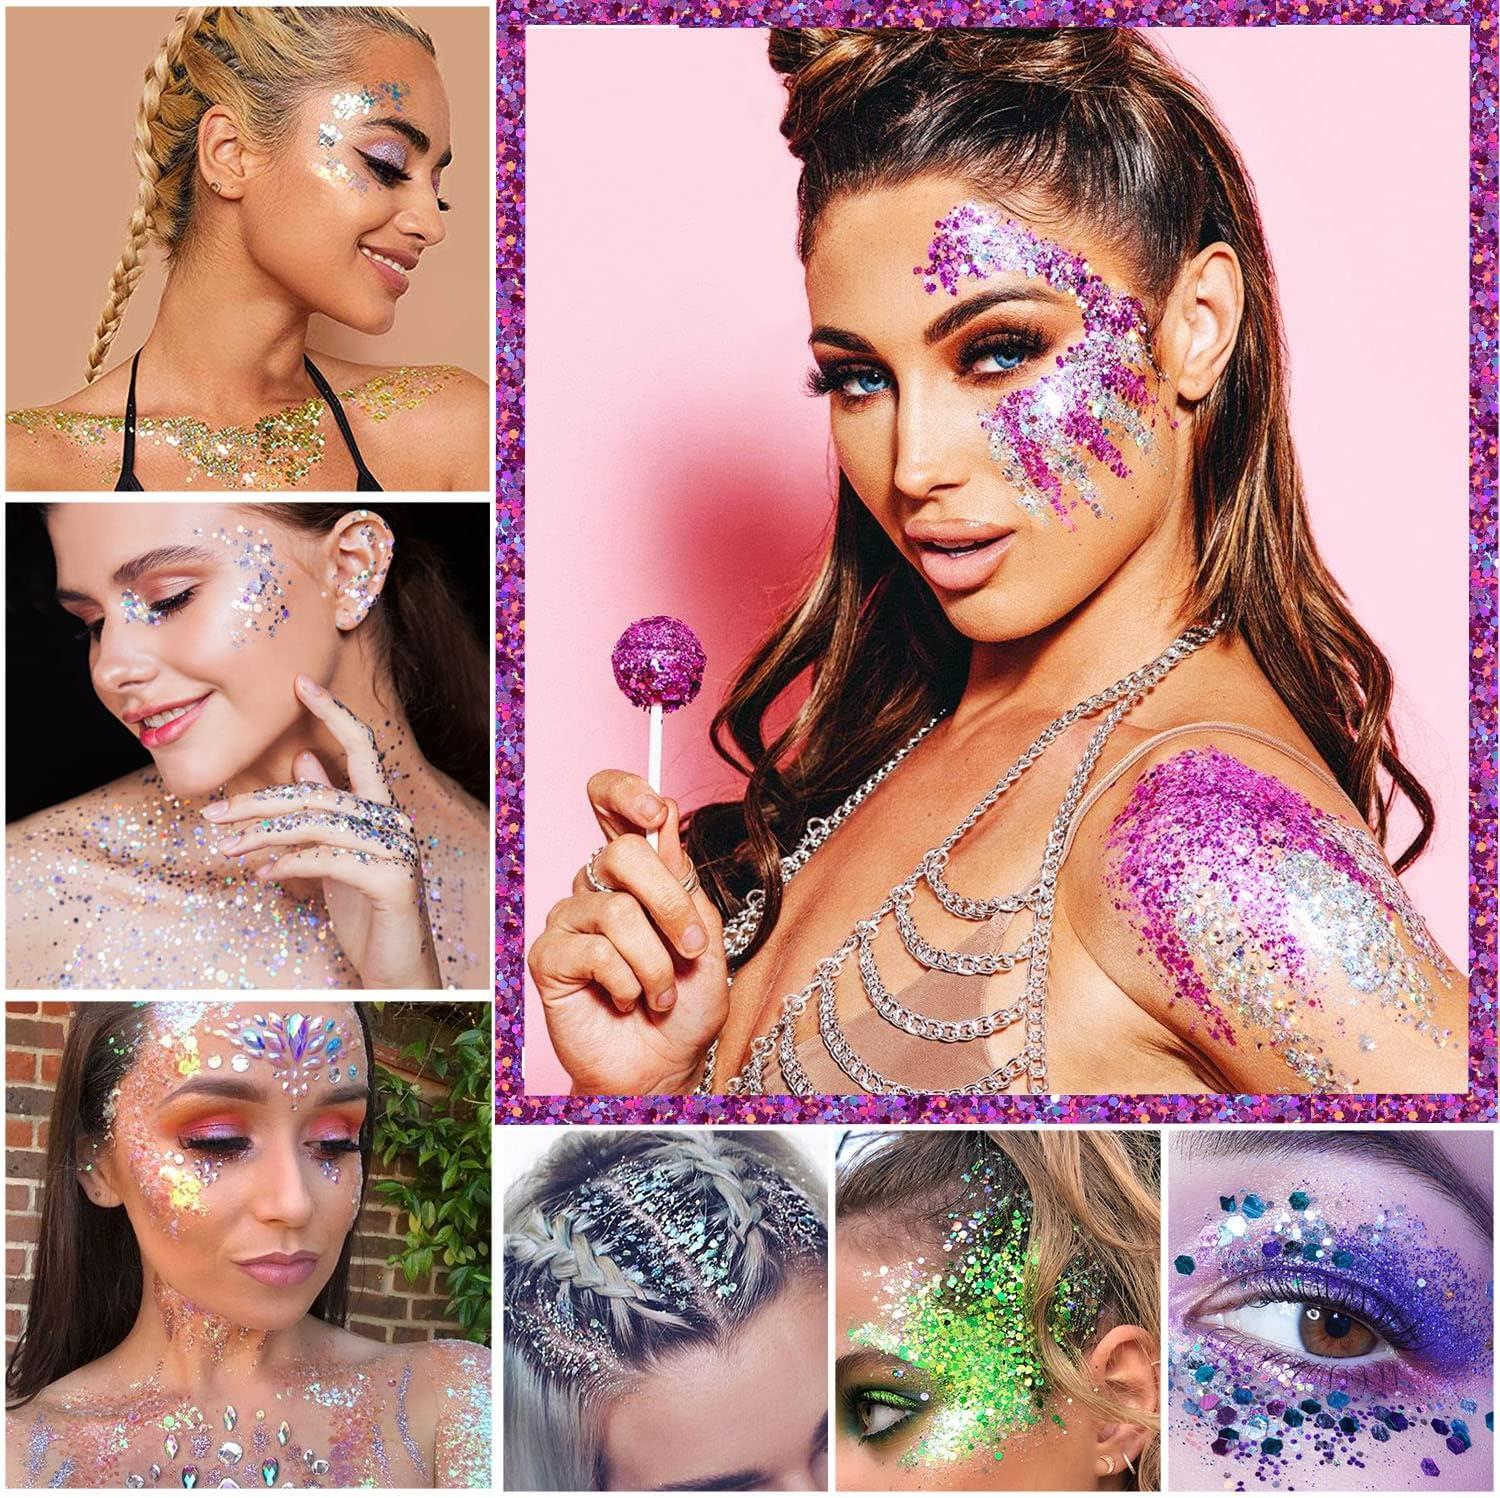 Warmfits Holographic Chunky Glitter 12 Colors Total 120g Face Body Eye Hair Nail Festival Chunky Holographic Glitter Different Size Stars and Hexagons